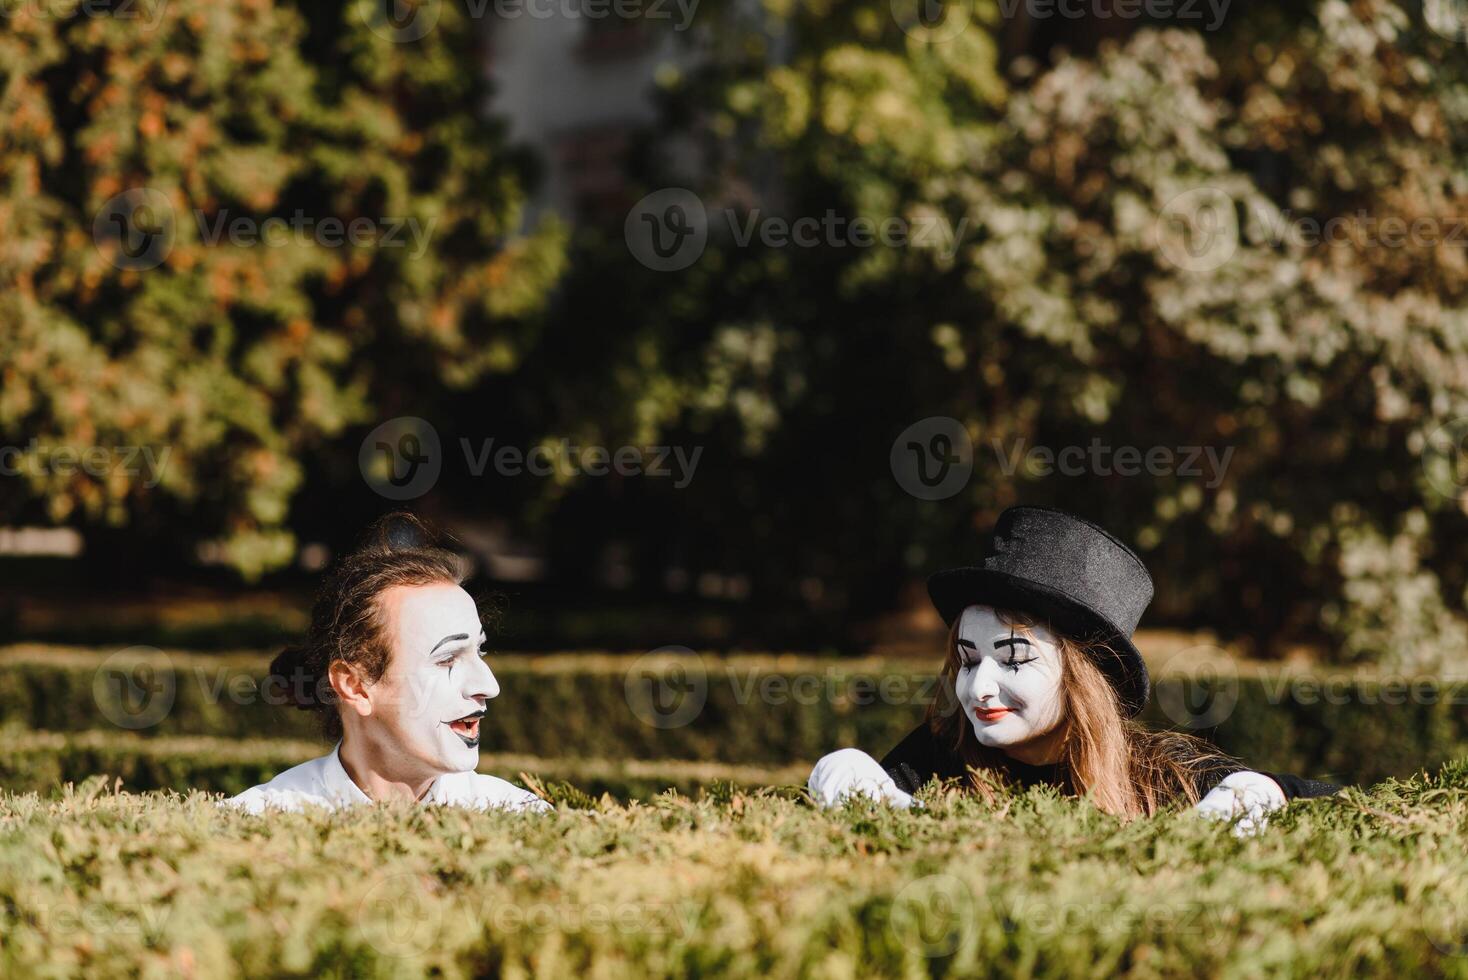 Street artists performing, Two mimes man and woman in april fools day photo